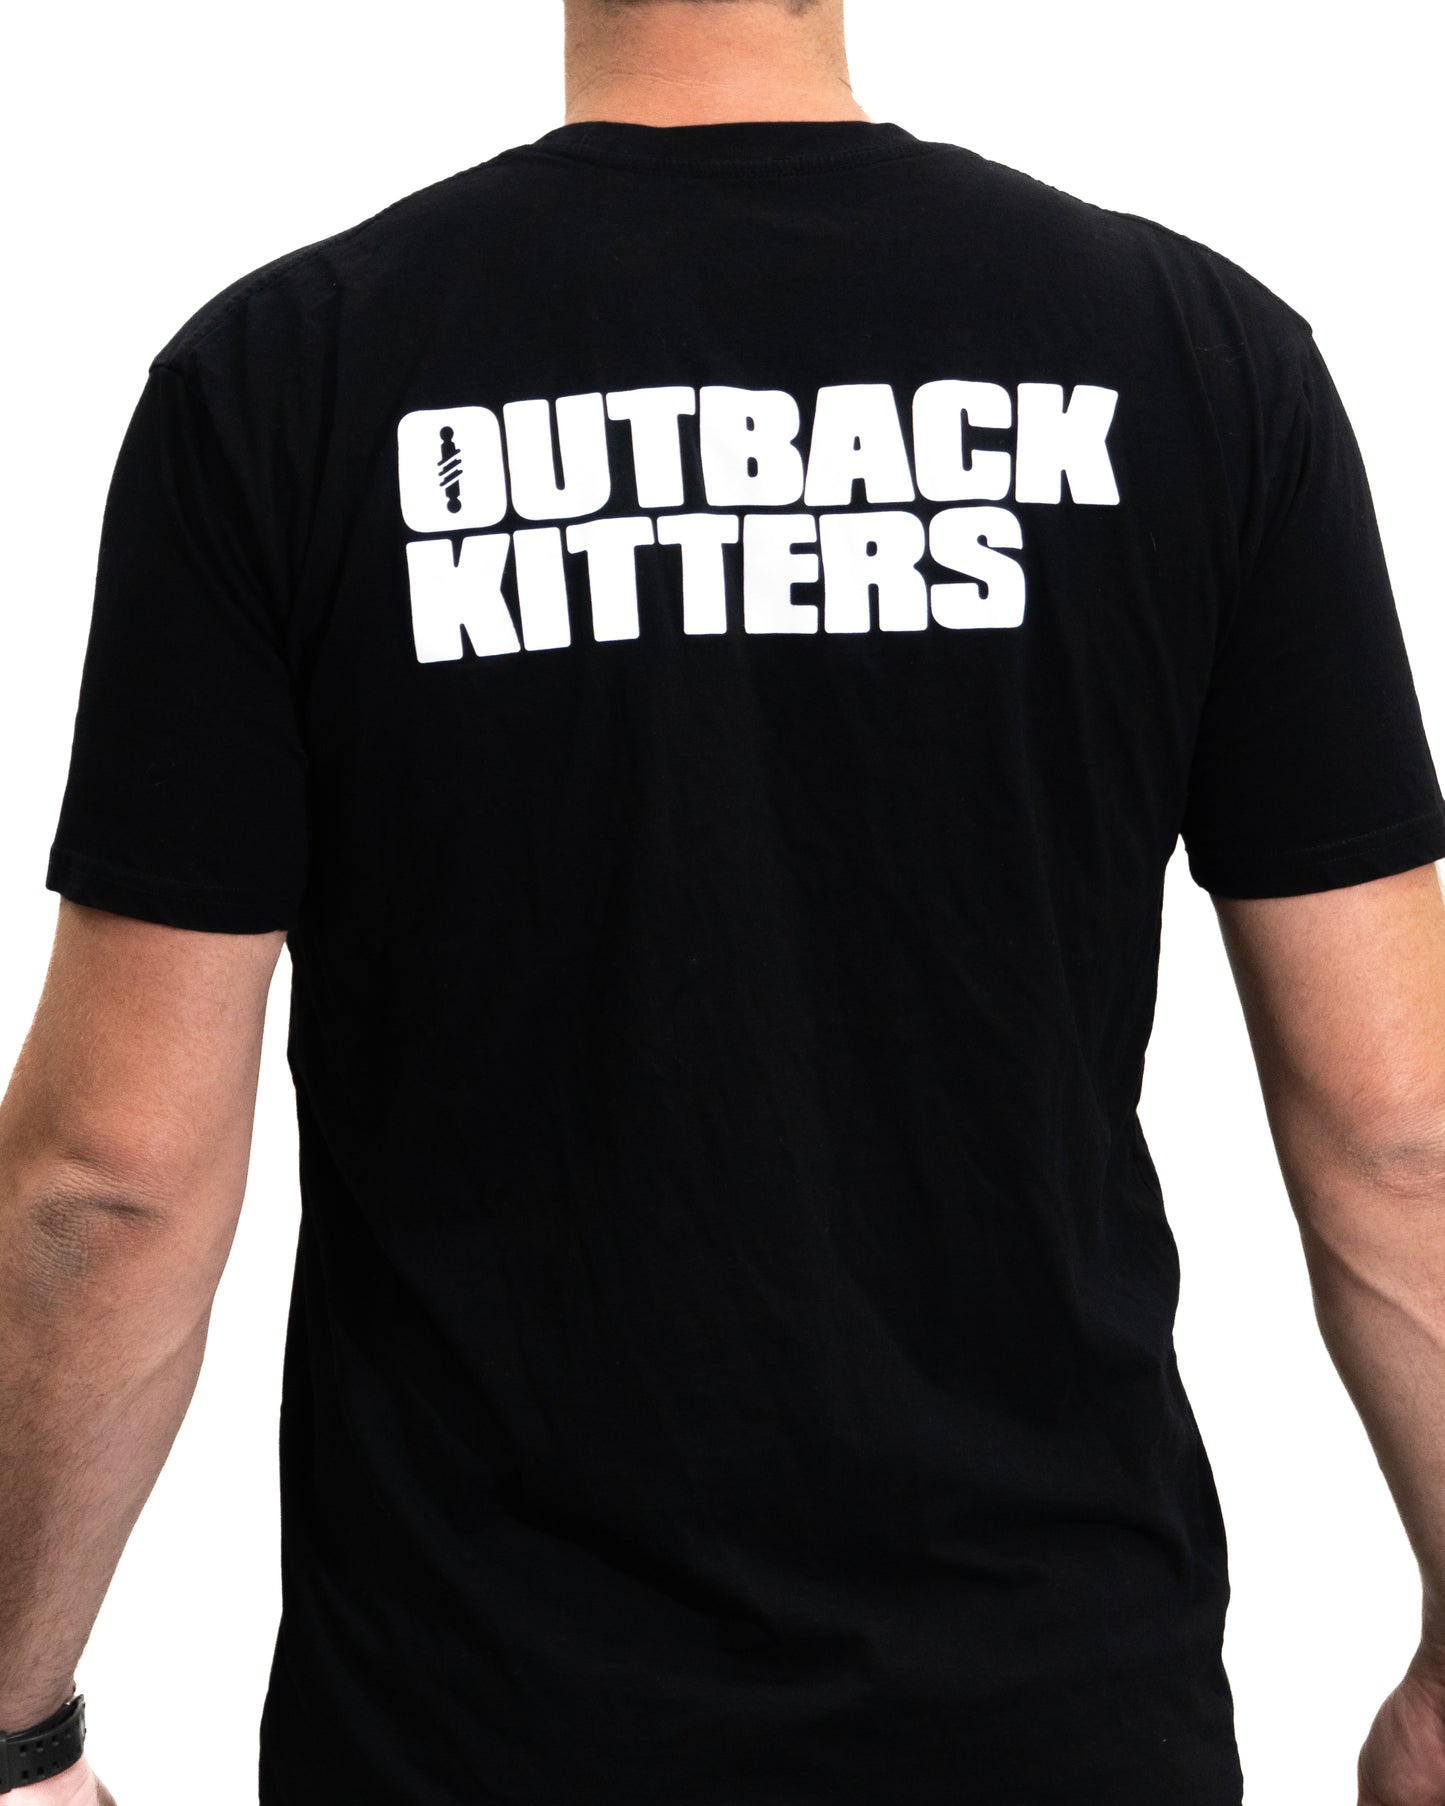 Outback Kitters "OK MATE" Logo Tee - Outback Kitters